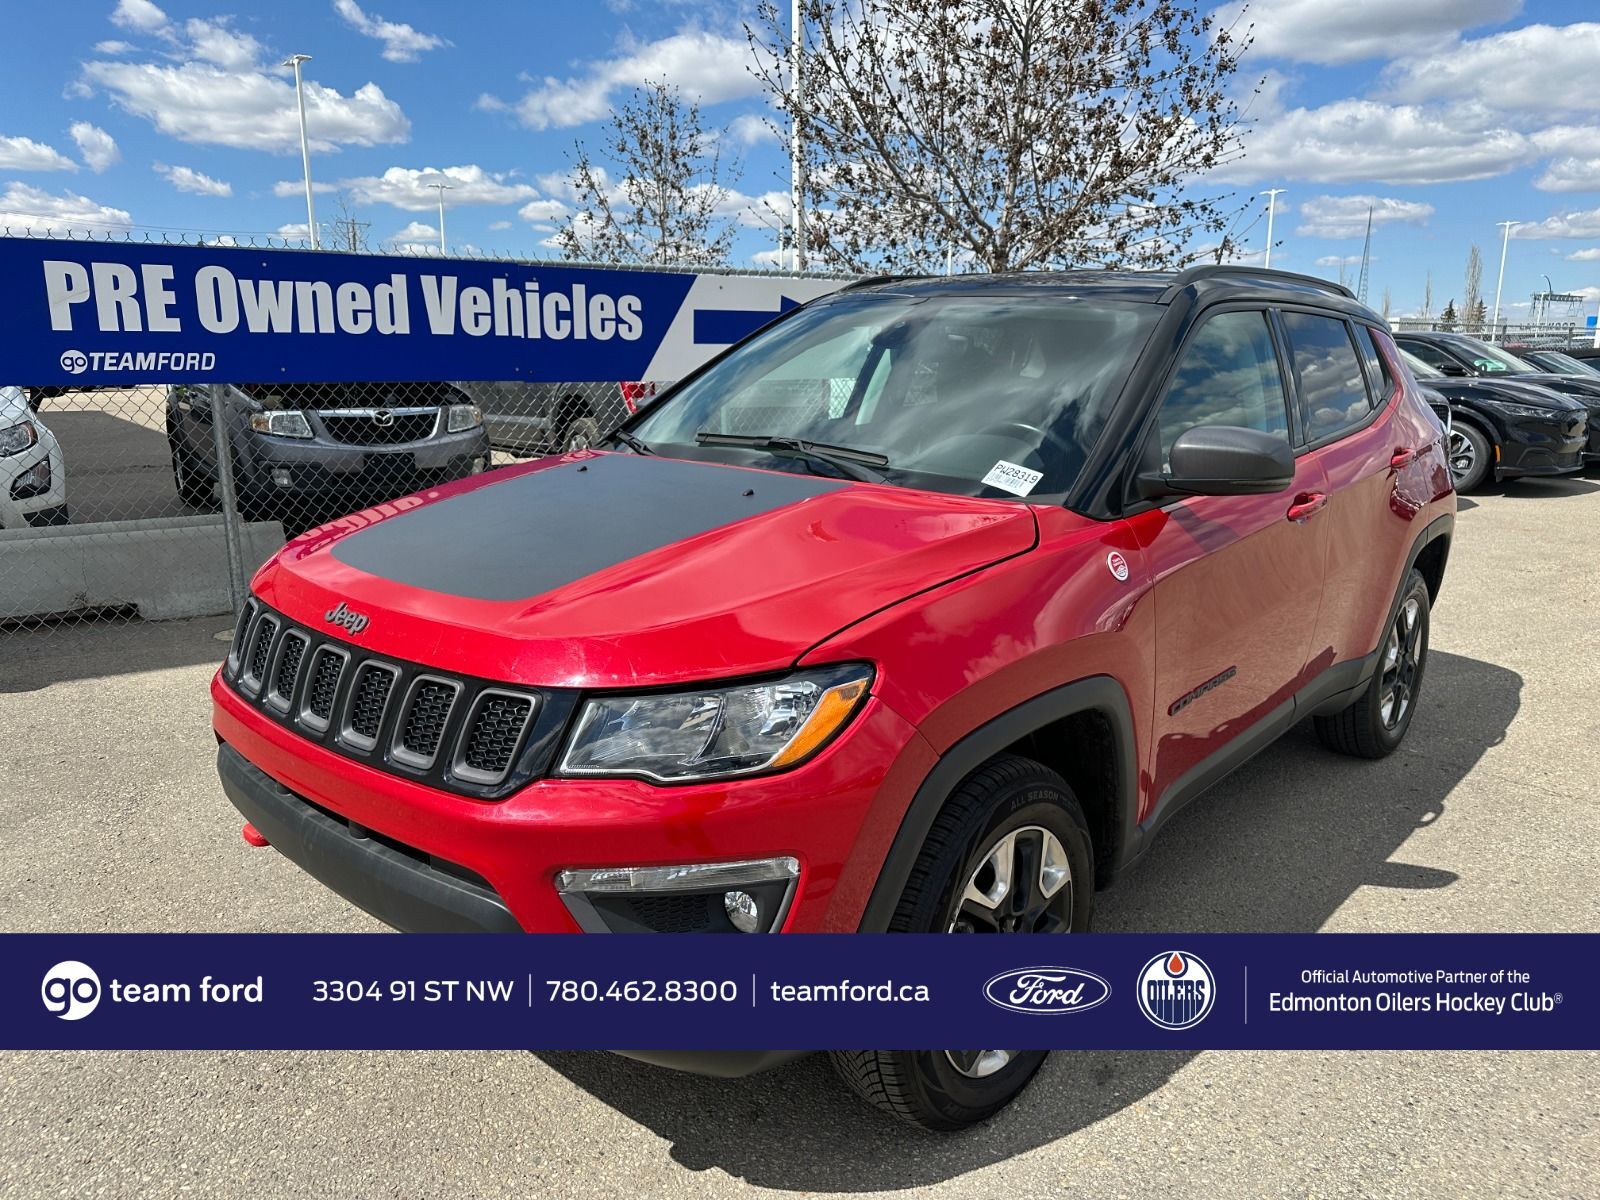 2018 Jeep Compass TRAILHAWK - 4X4, LEATHER, BACK UP CAM, HEATED SEAT